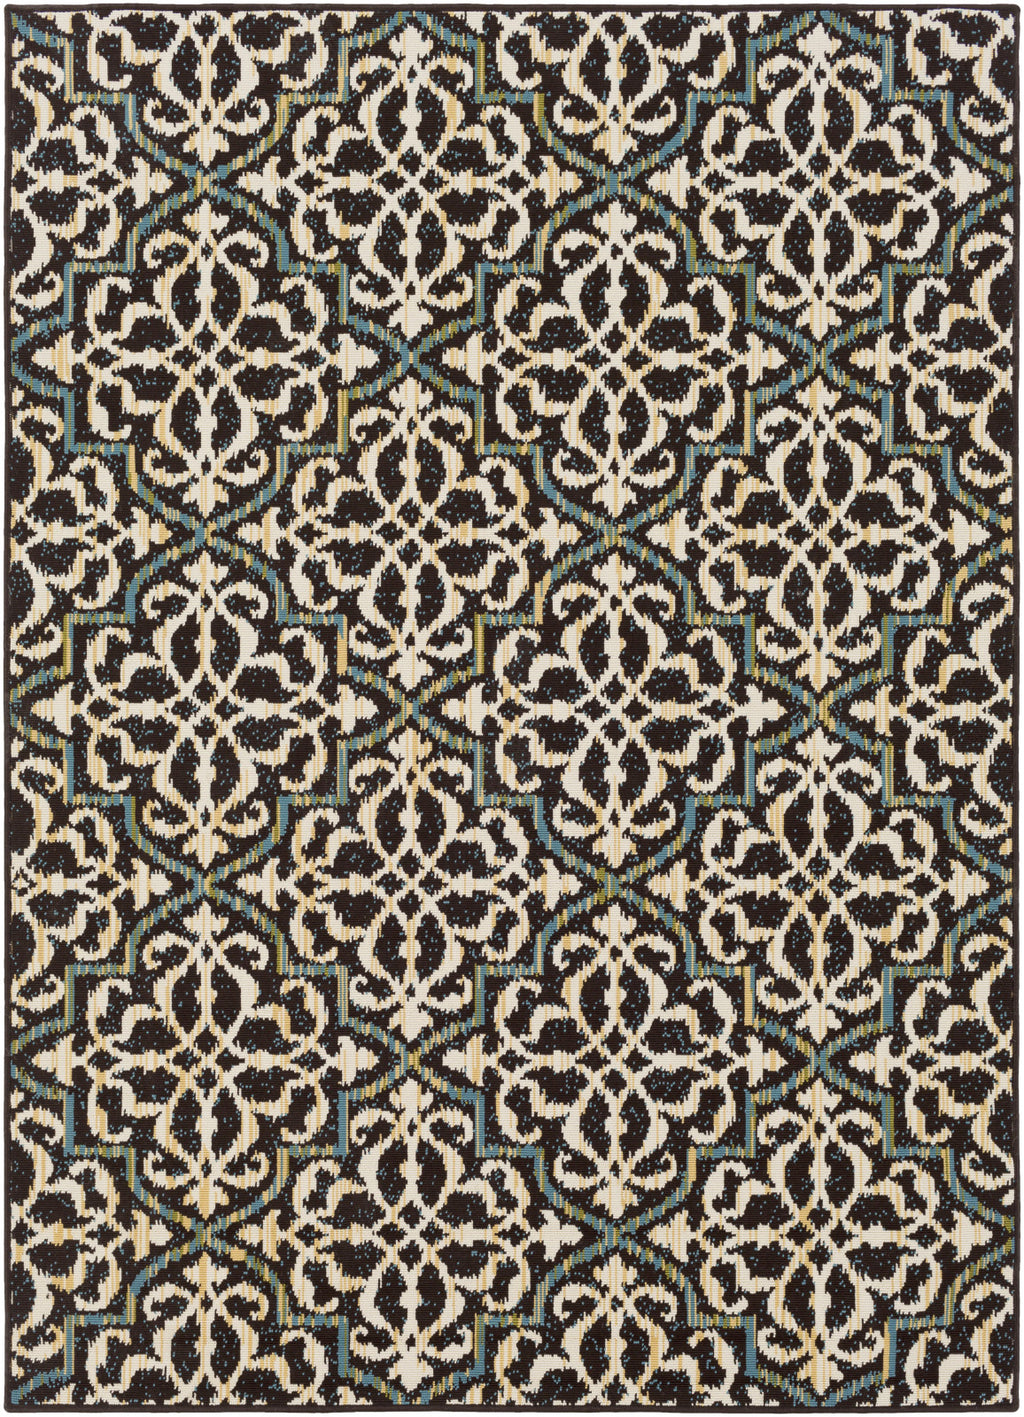 Artistic Weavers Myrtle Rio Chocolate Brown/Ivory Area Rug main image